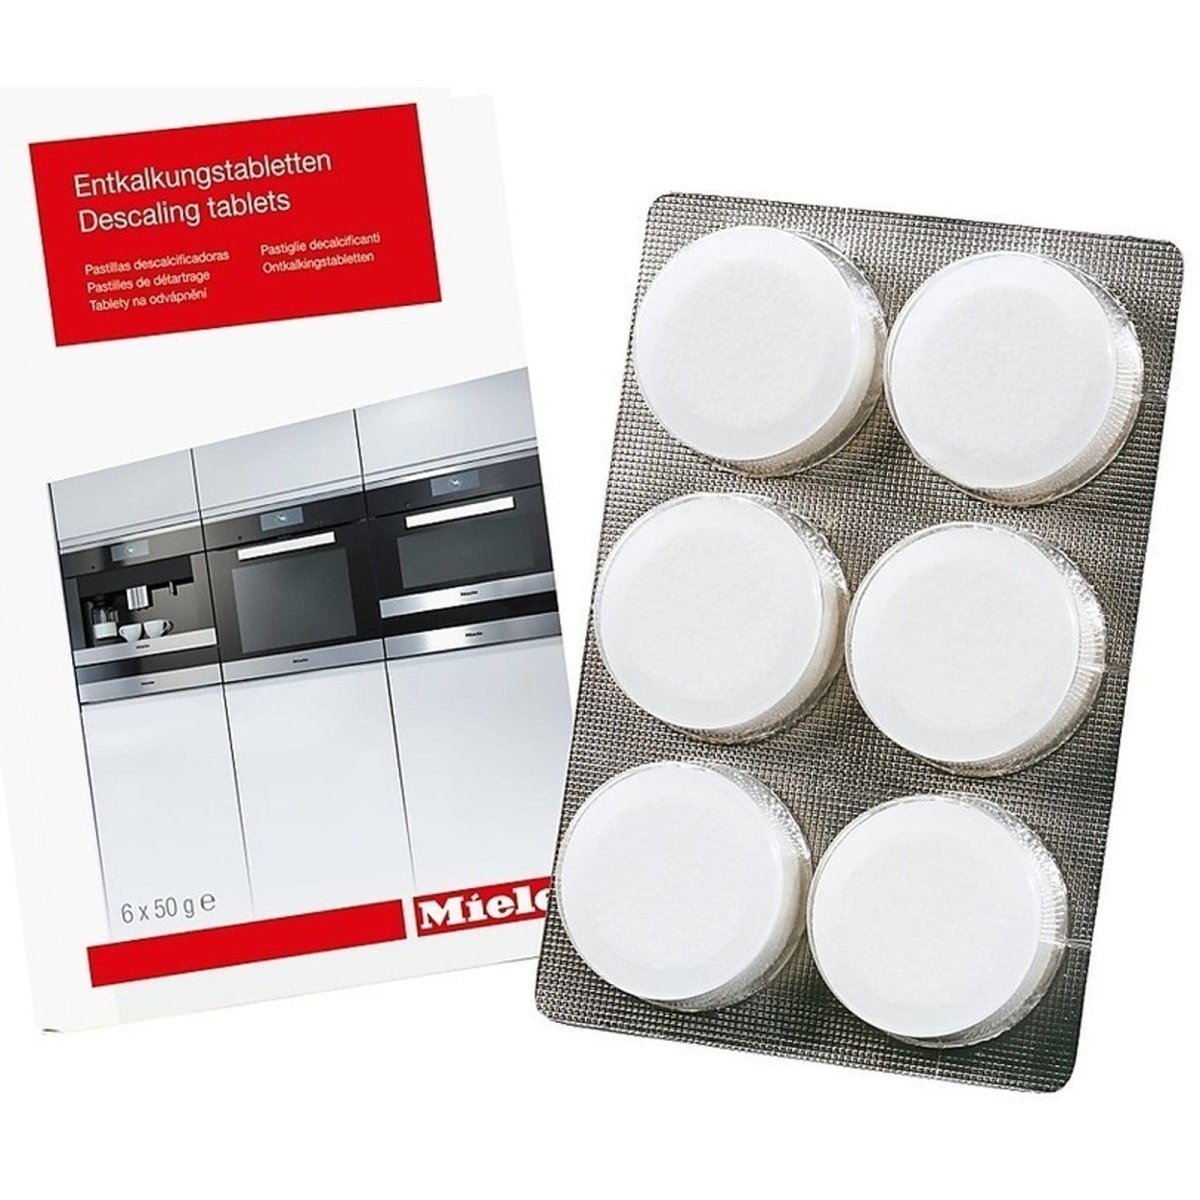 Miele 10178330 Descaling Tablets For Ovens, Coffee Machines & Irons (Pack of 6) - Atlantic Electrics